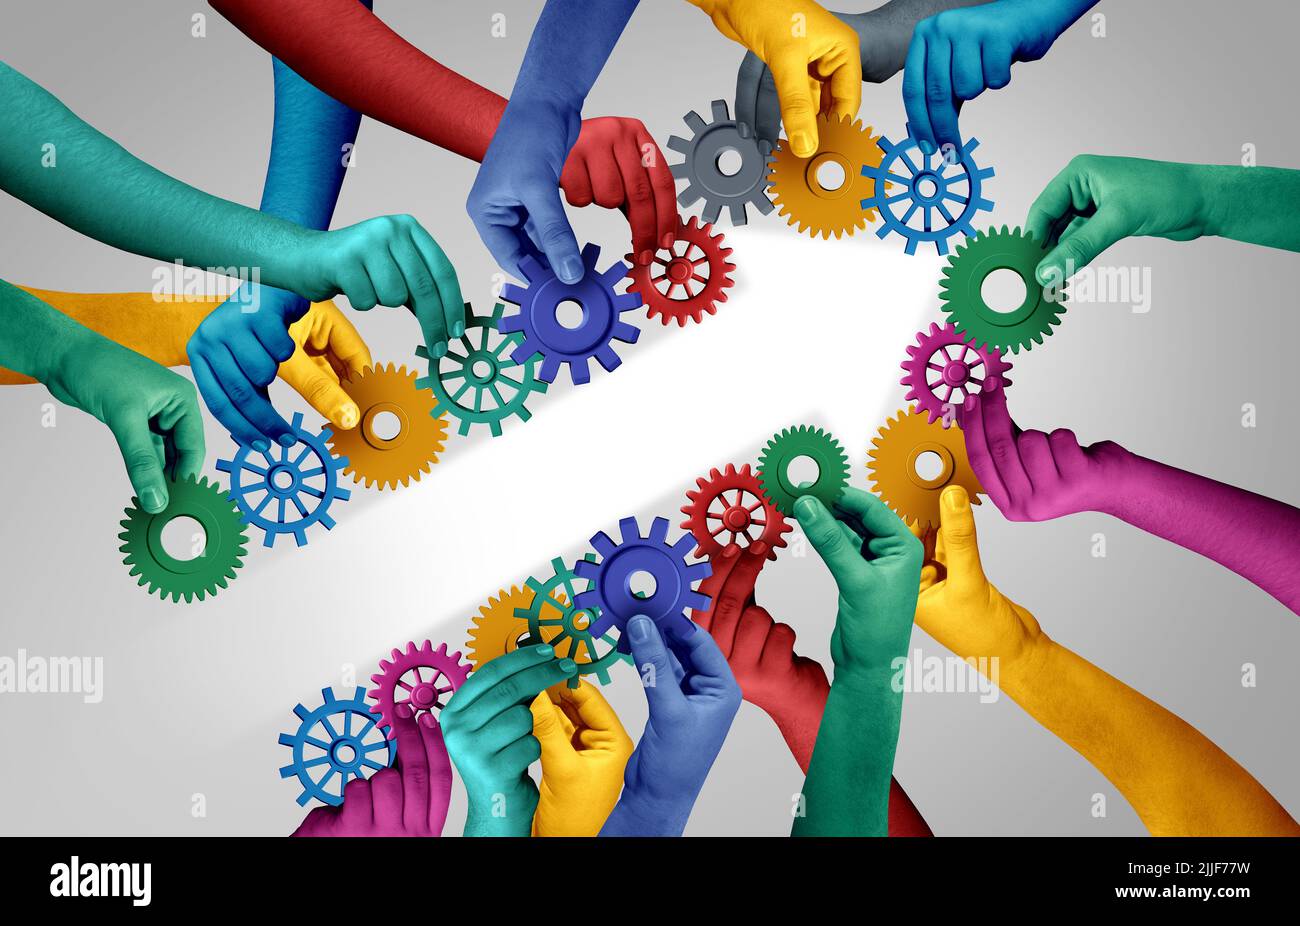 Business team progress and group success arrow connected as diverse hands holding gears united together to form a shape of positive diversity. Stock Photo